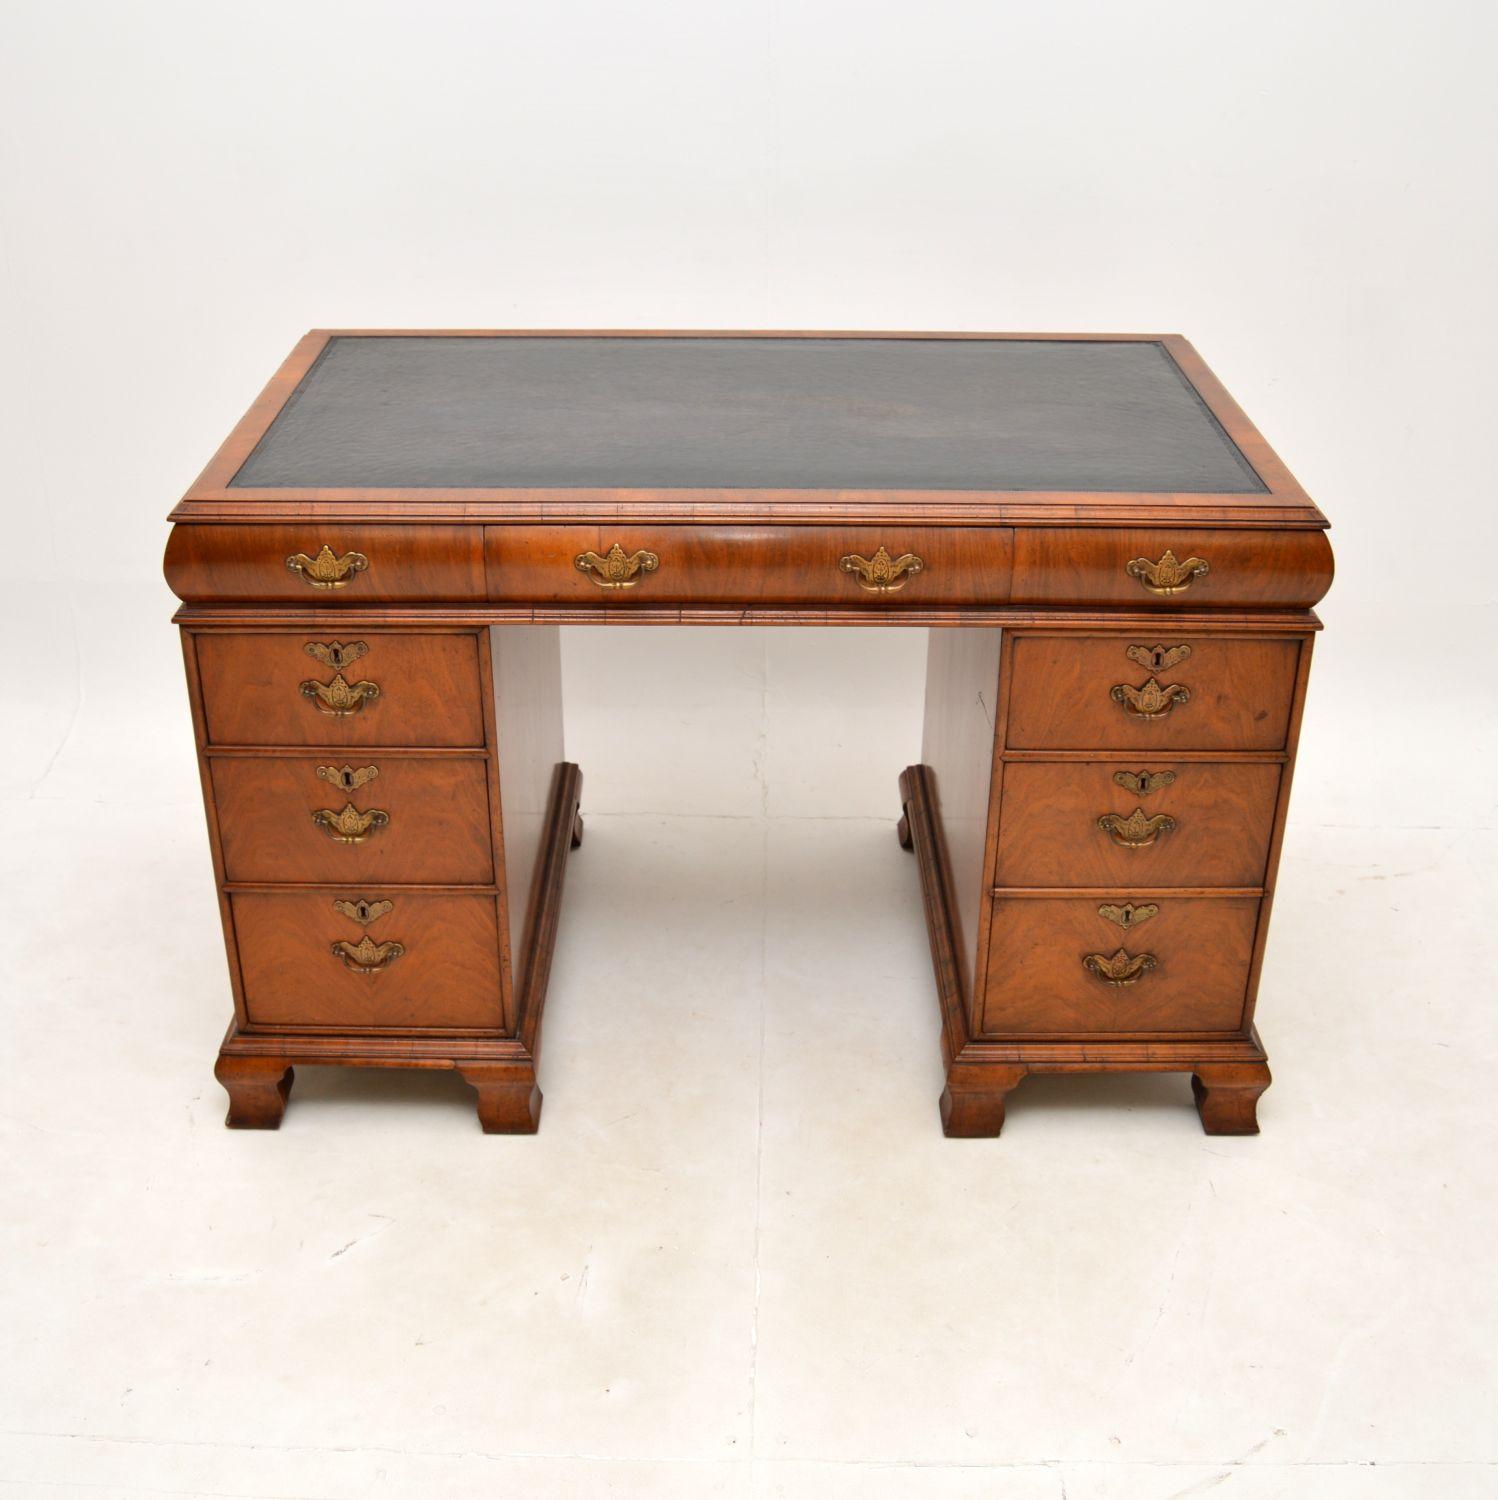 A superb antique walnut leather top pedestal desk. This was made in England, it dates from around the 1890-1910 period.

It is of extremely fine quality, with a gorgeous cushion top design. The walnut has a beautiful patina and colour tone, this has